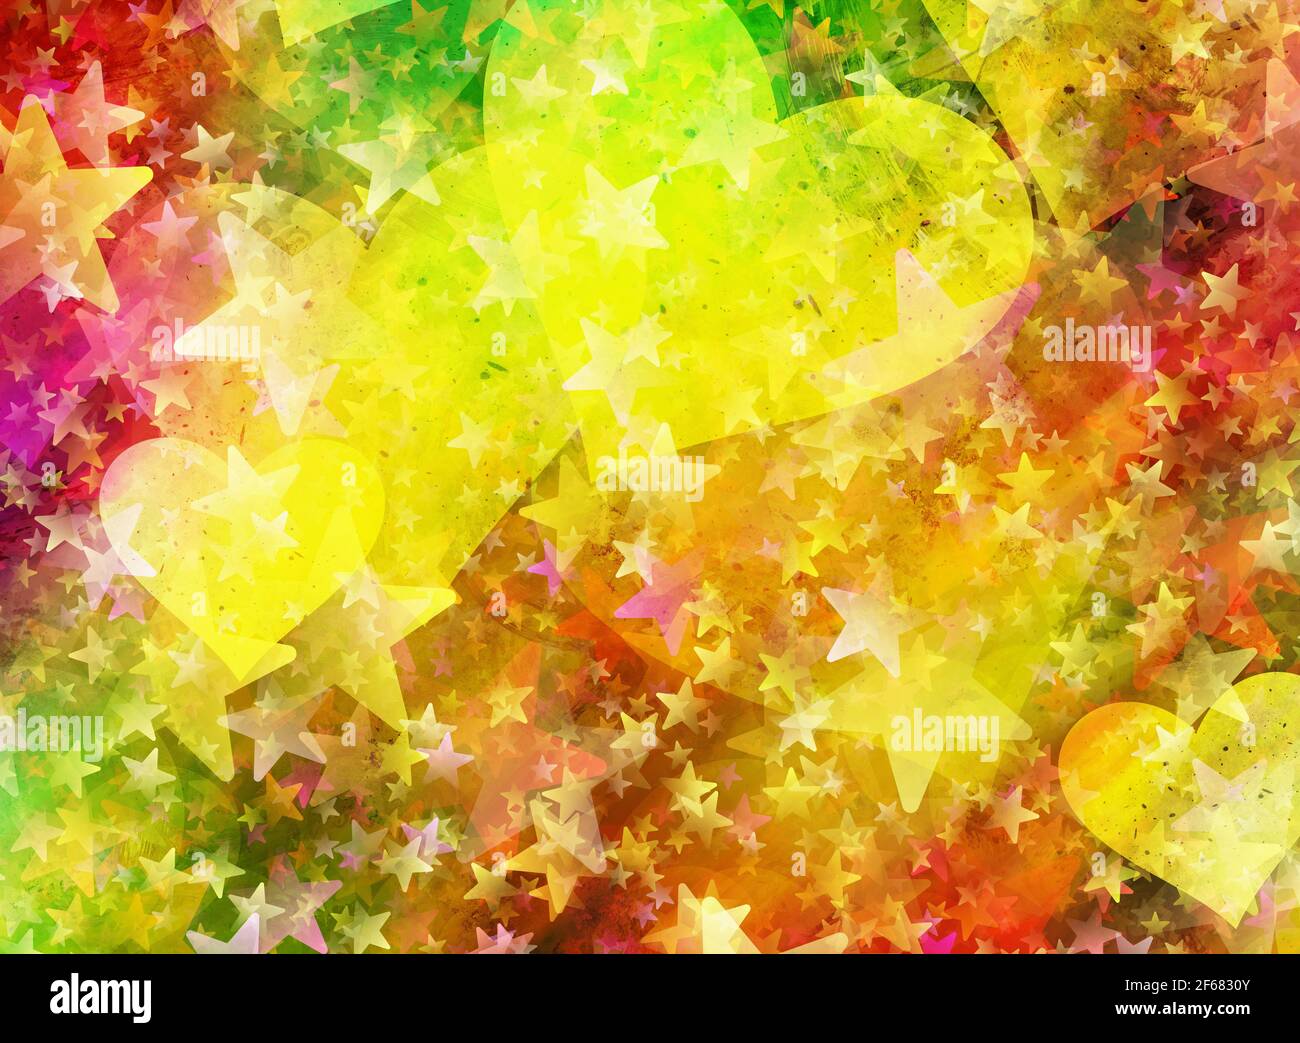 multicolored painted hearts and stars backgrounds Stock Photo